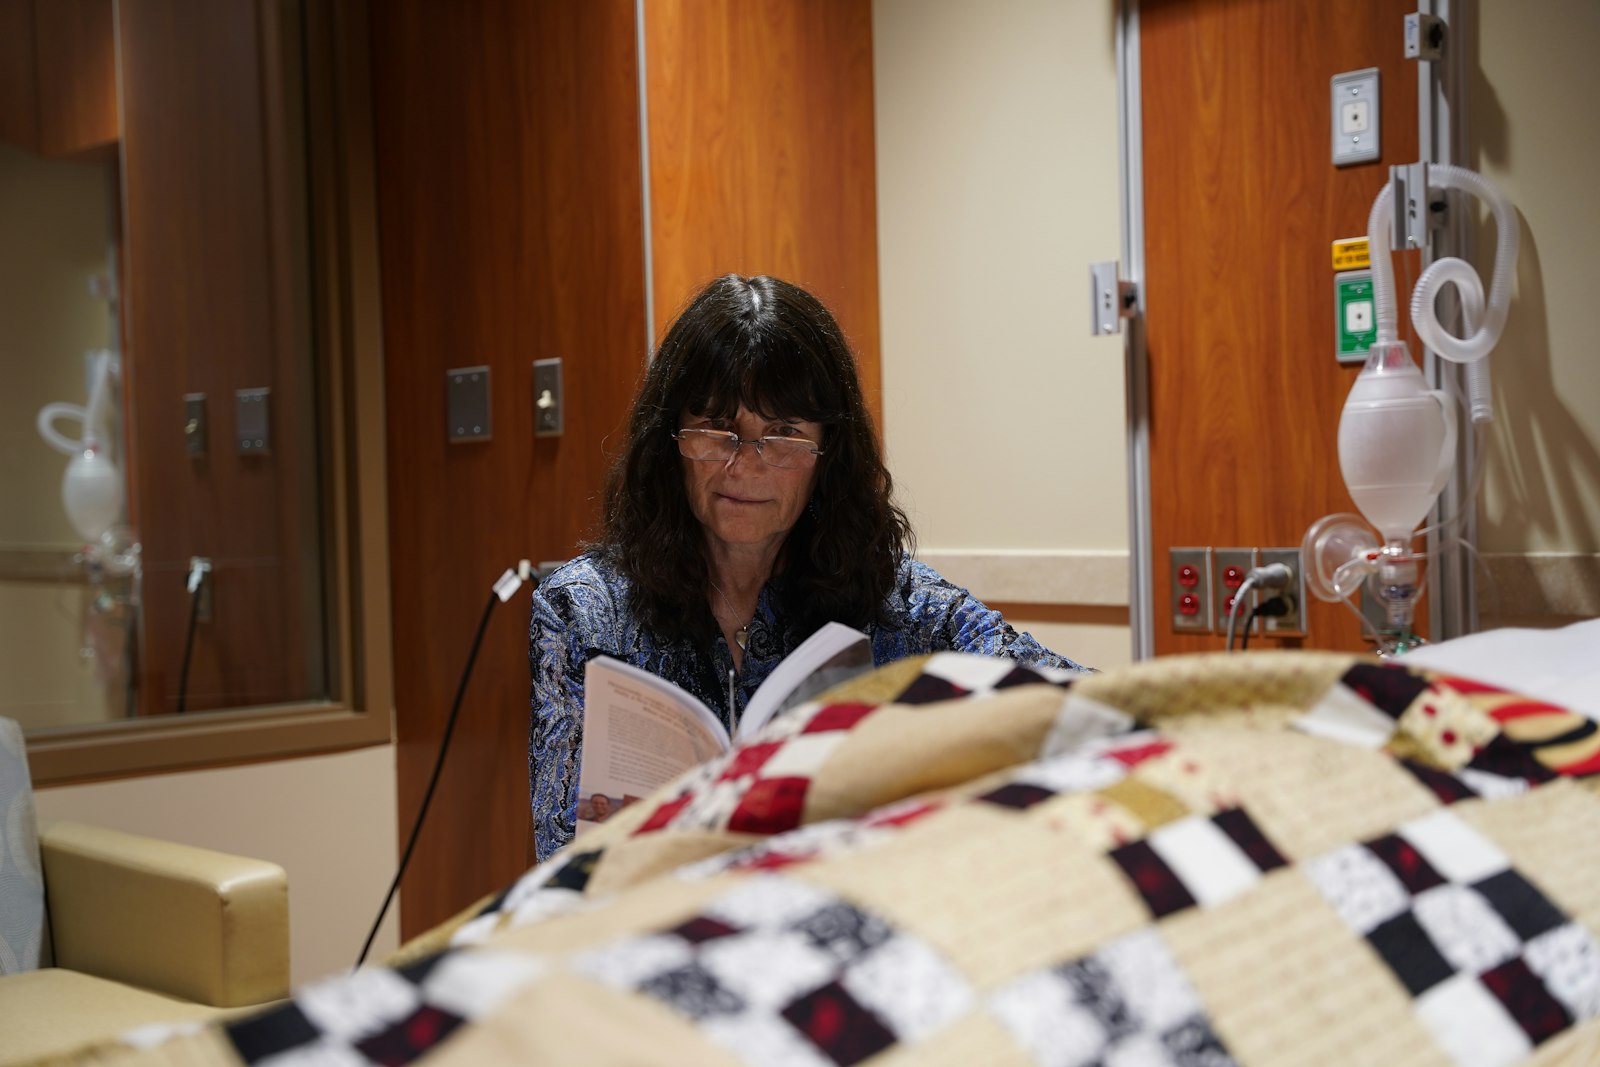 Lisa Marie Blanek, a No One Dies Alone volunteer, reads a book bedside of a patient. The No One Dies Alone program has volunteer read to terminally-ill patients, play music or just hold hands with people as they near death. The program ensures no patient at Trinity Health’s Livonia and Pontiac hospitals dies without anyone else in the room.